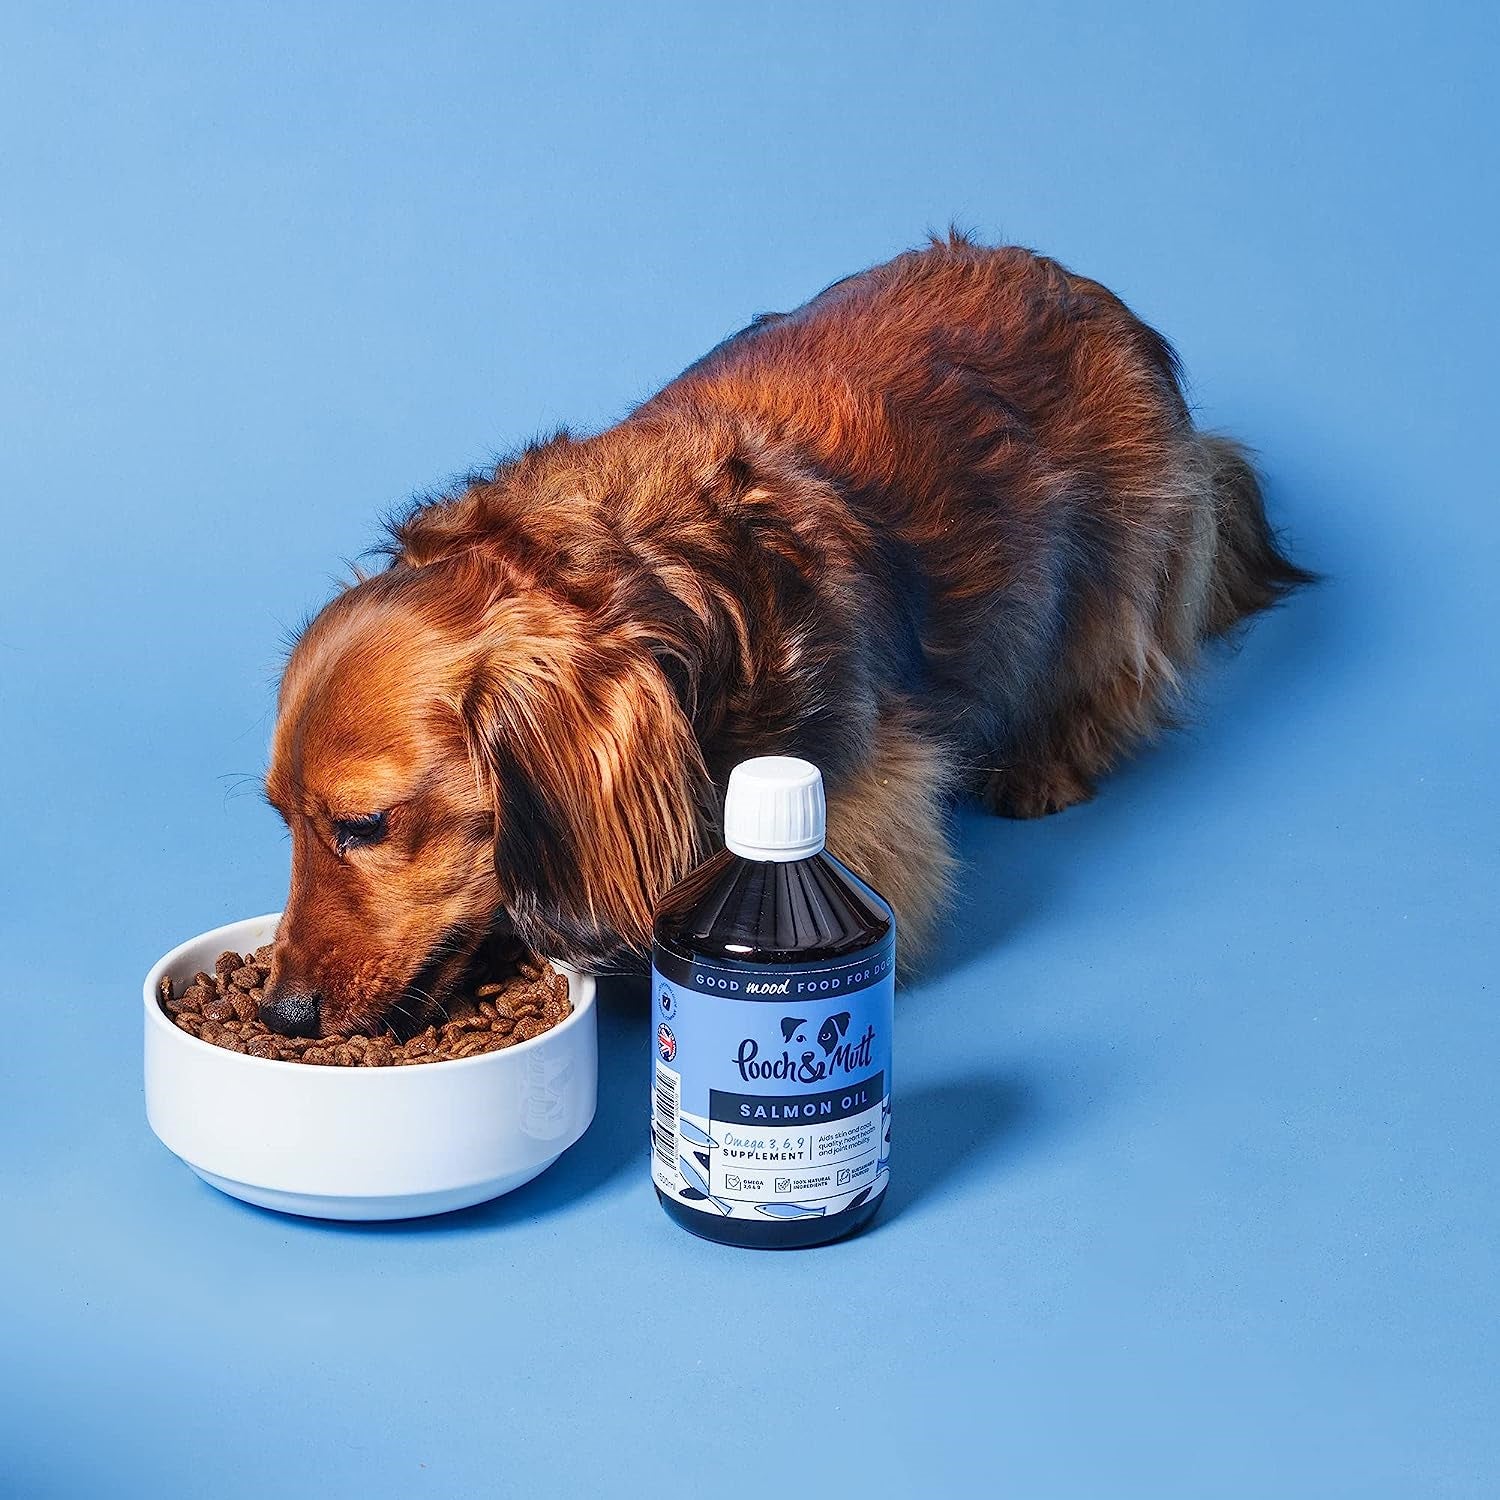 Pooch & Mutt - Natural Salmon Oil Supplement for Dogs and Cats Rich in Omega 3,